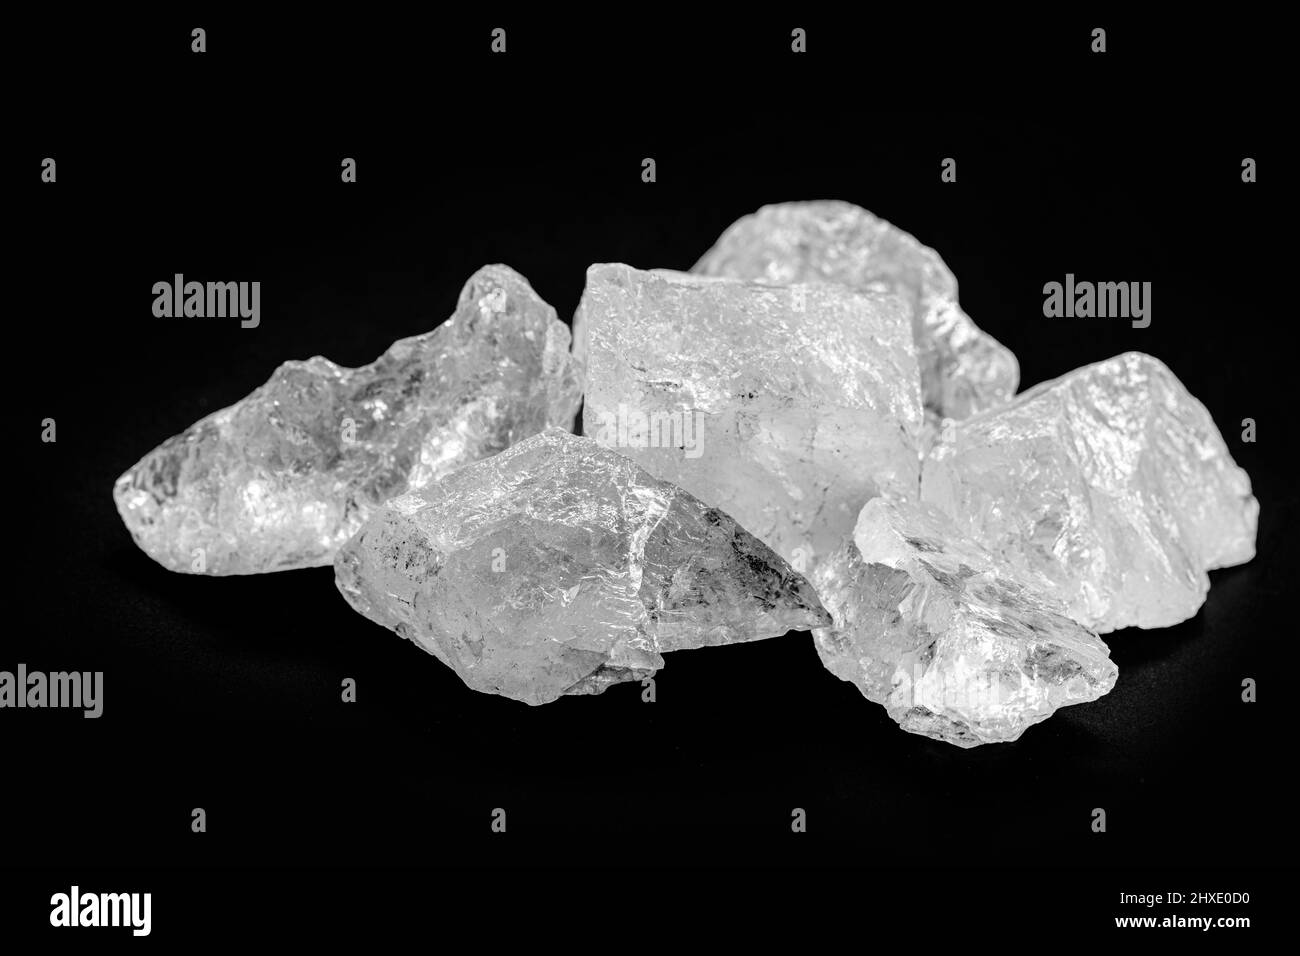 Potassium alum stones, or potash alum, called ame-stone, is the double sulfate of aluminum and potassium, widely used to reduce sweating Stock Photo